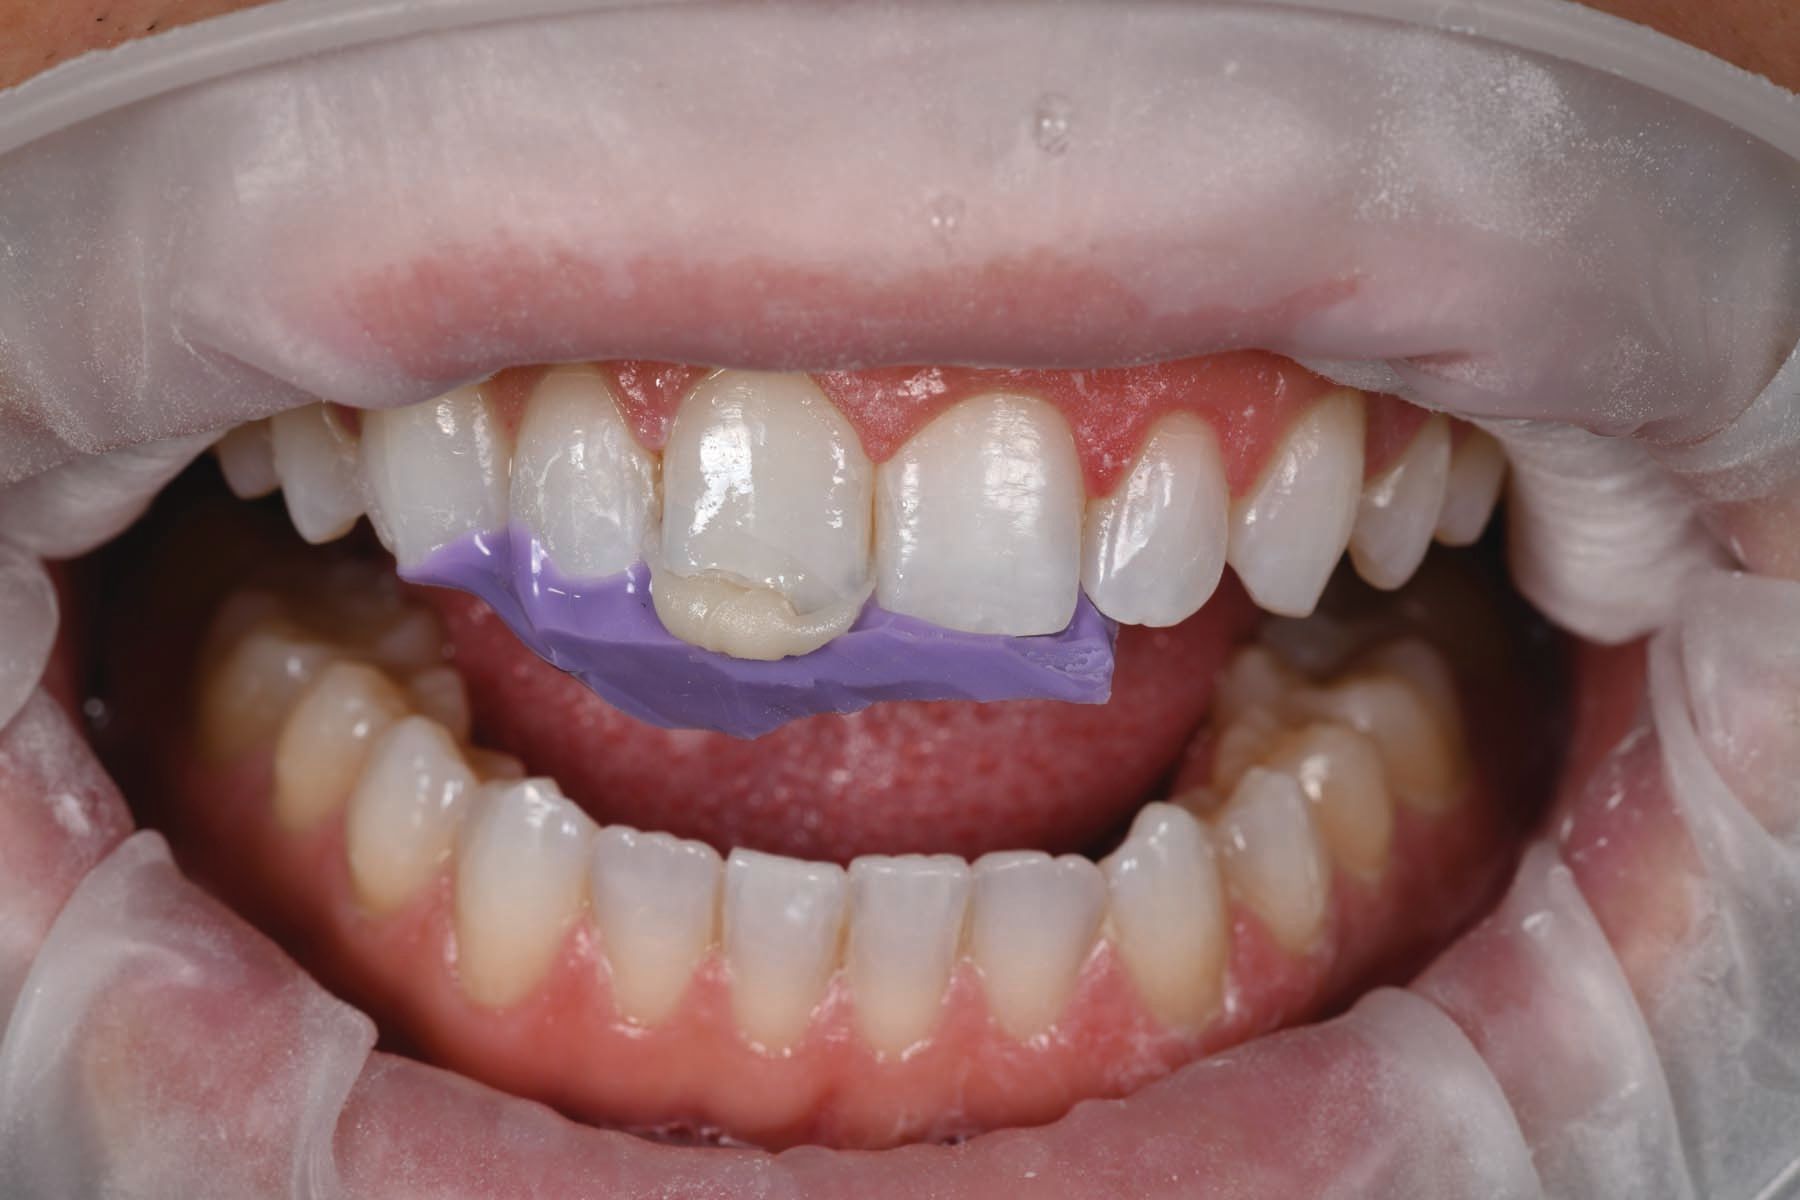 Figures 9 and 10. The silicone matrix was filled with the first layer of composite and was compressed into place to create adaptation while recreating the lingual aspect of the tooth.